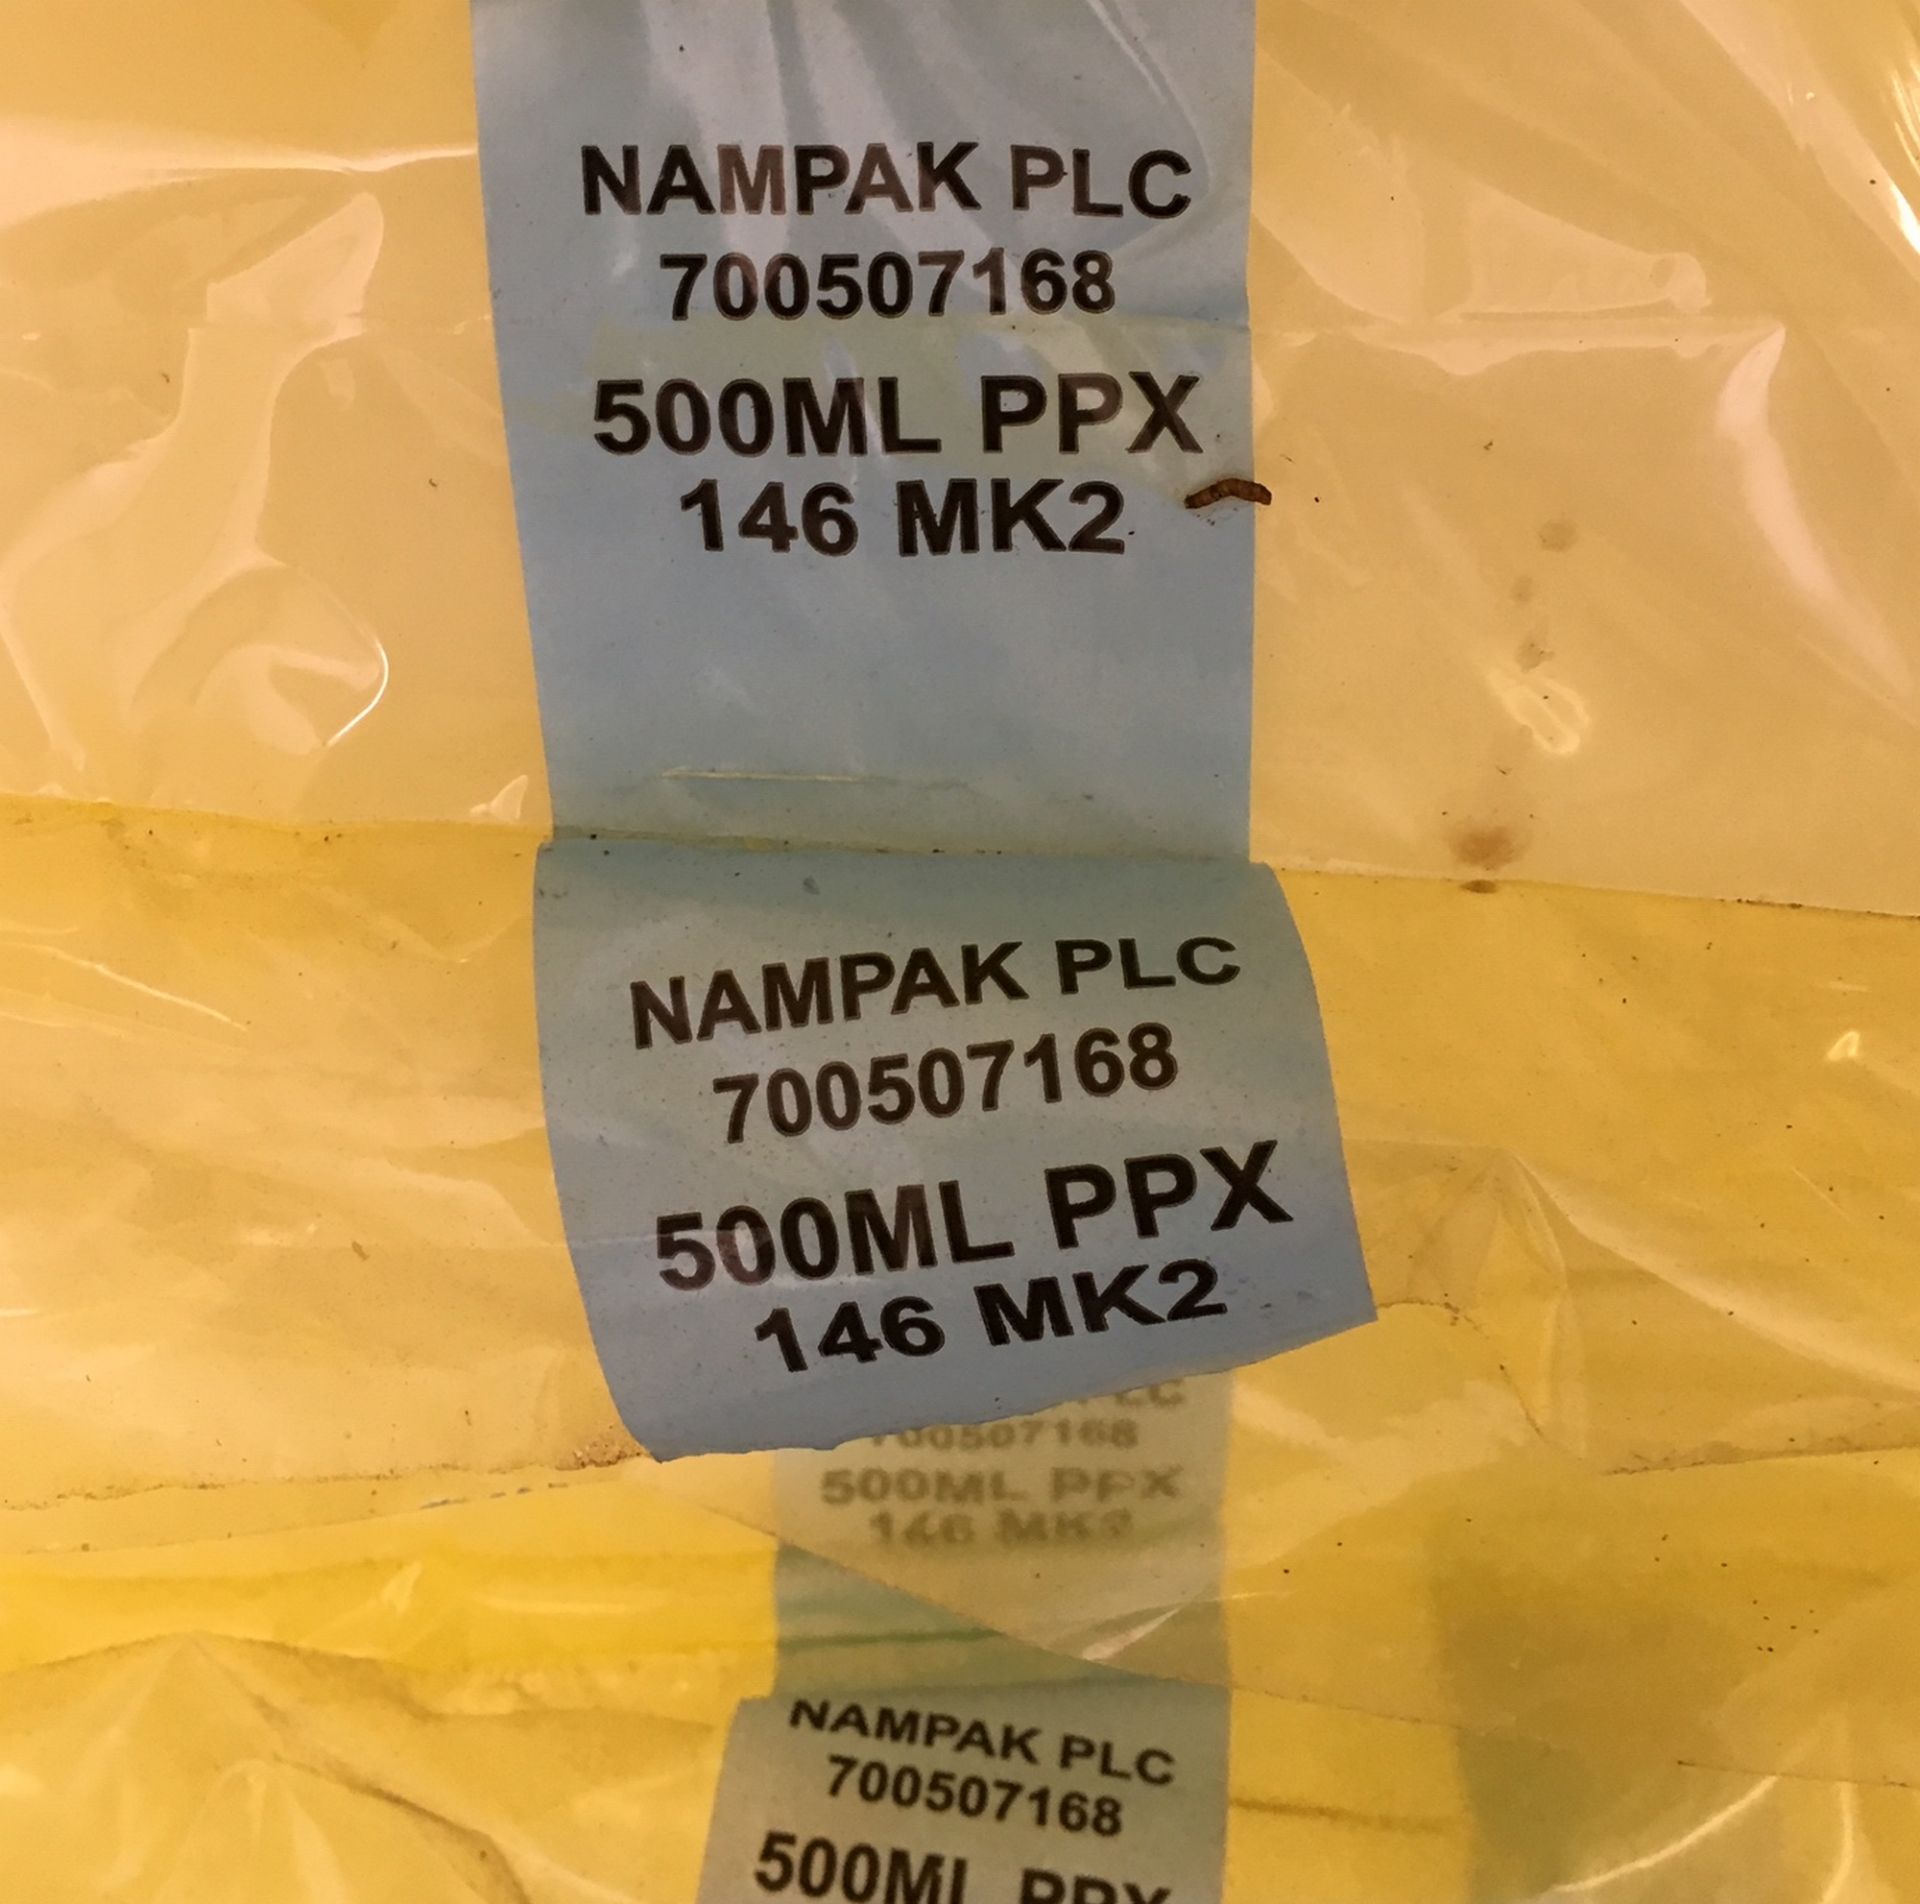 24 packs of Nampak 500ml Plastic Bottles each pack containing 112 pieces - 2688 bottles in total. - Image 2 of 2